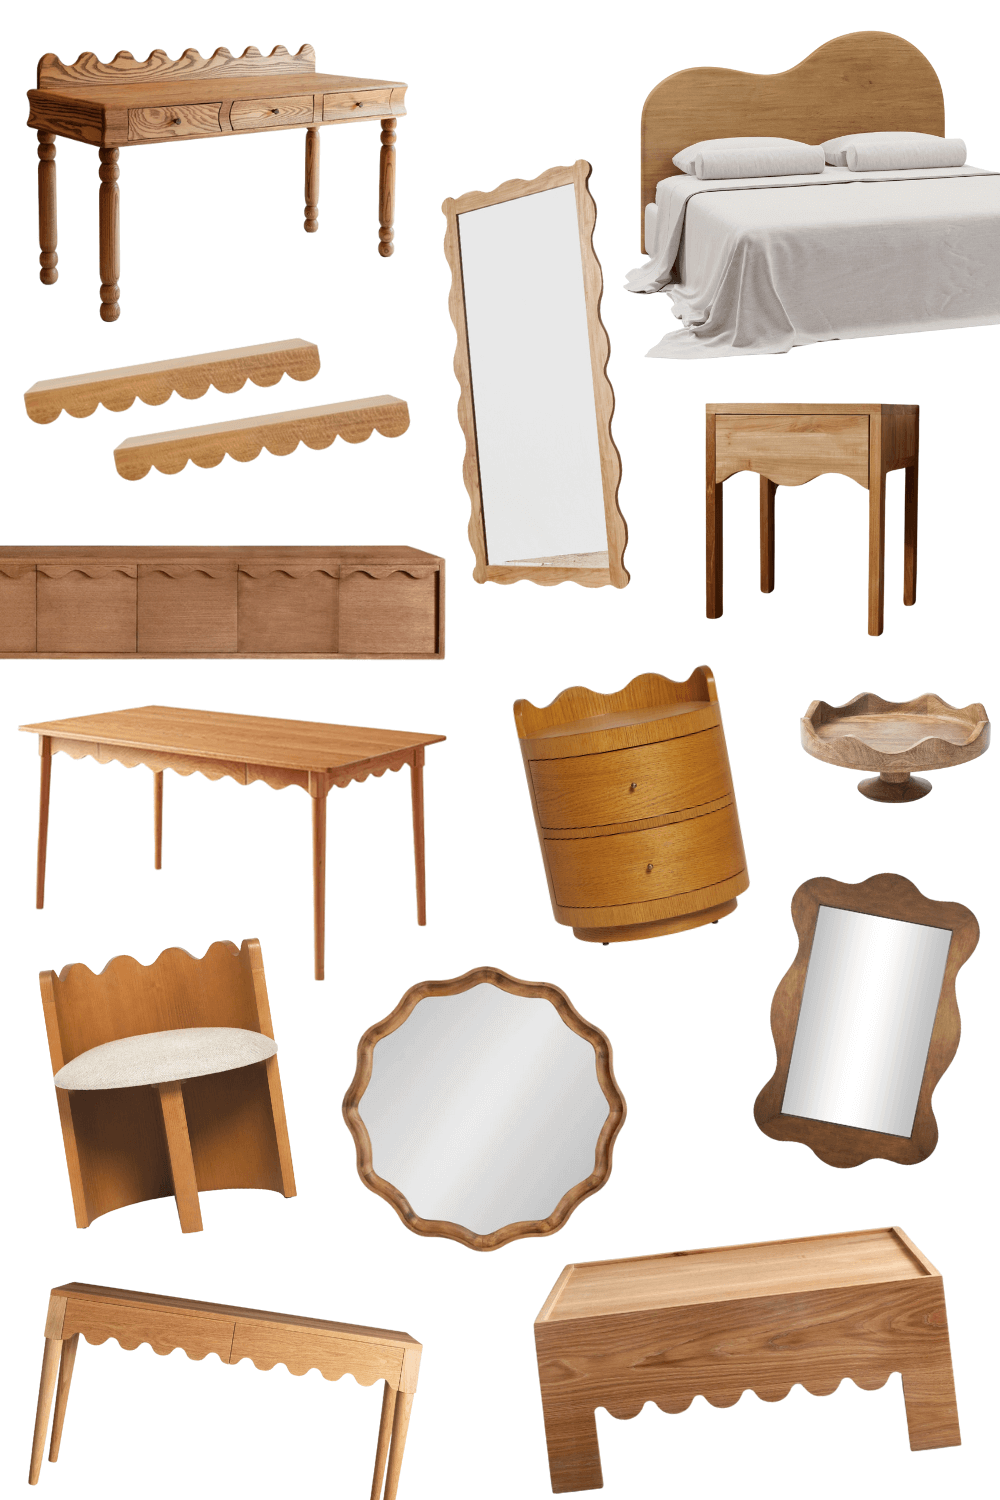 scalloped furniture collage of wood products